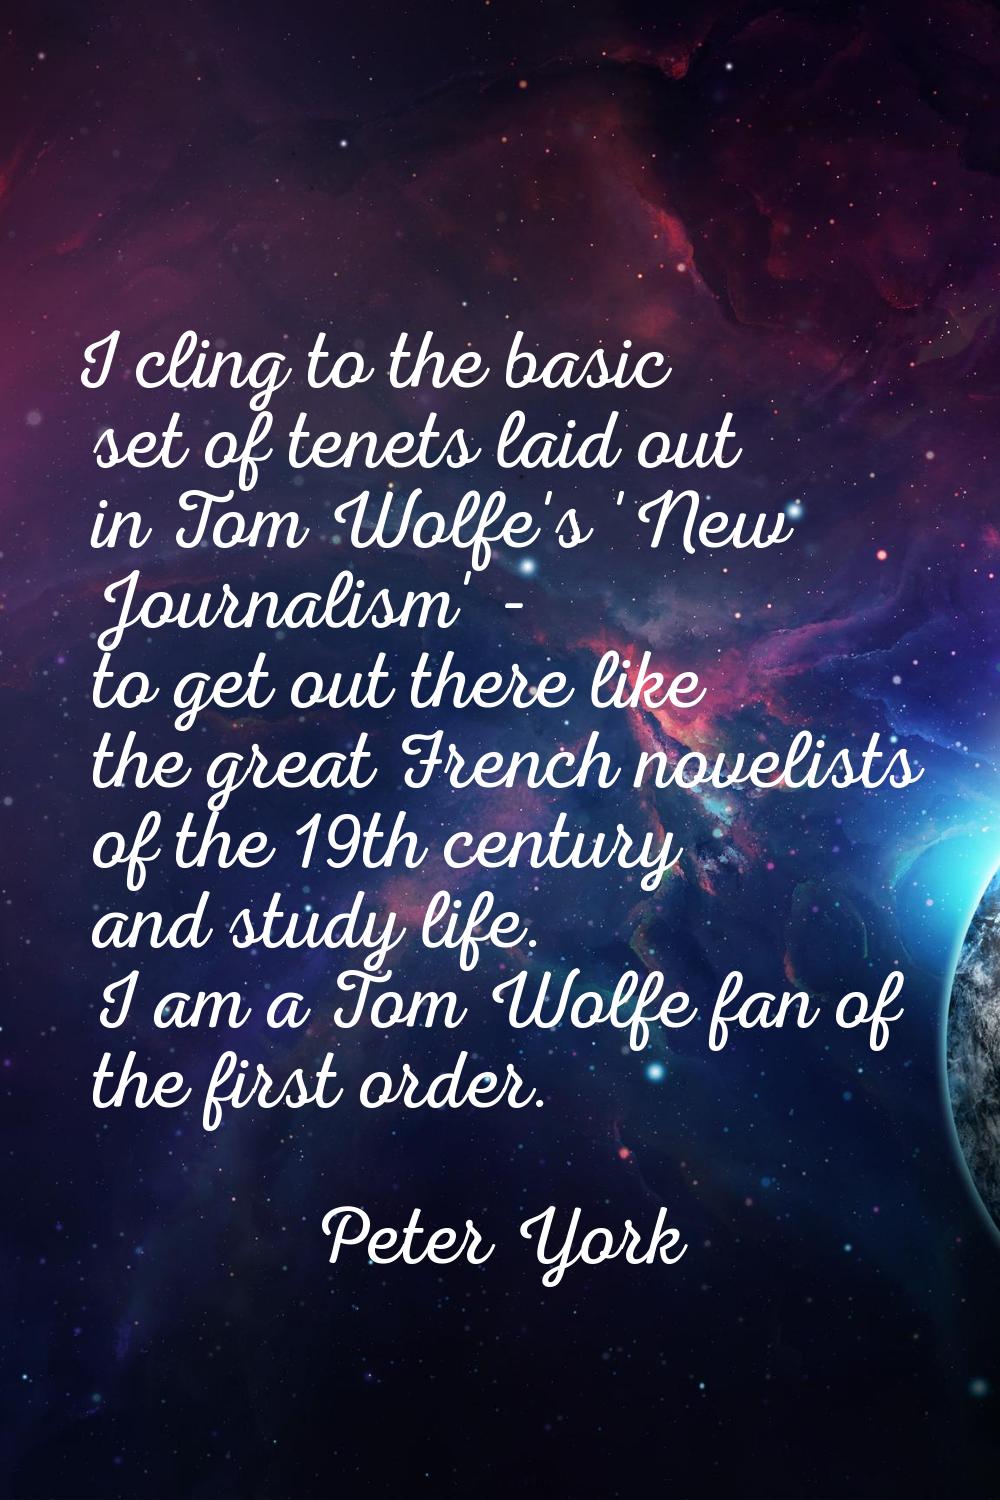 I cling to the basic set of tenets laid out in Tom Wolfe's 'New Journalism' - to get out there like